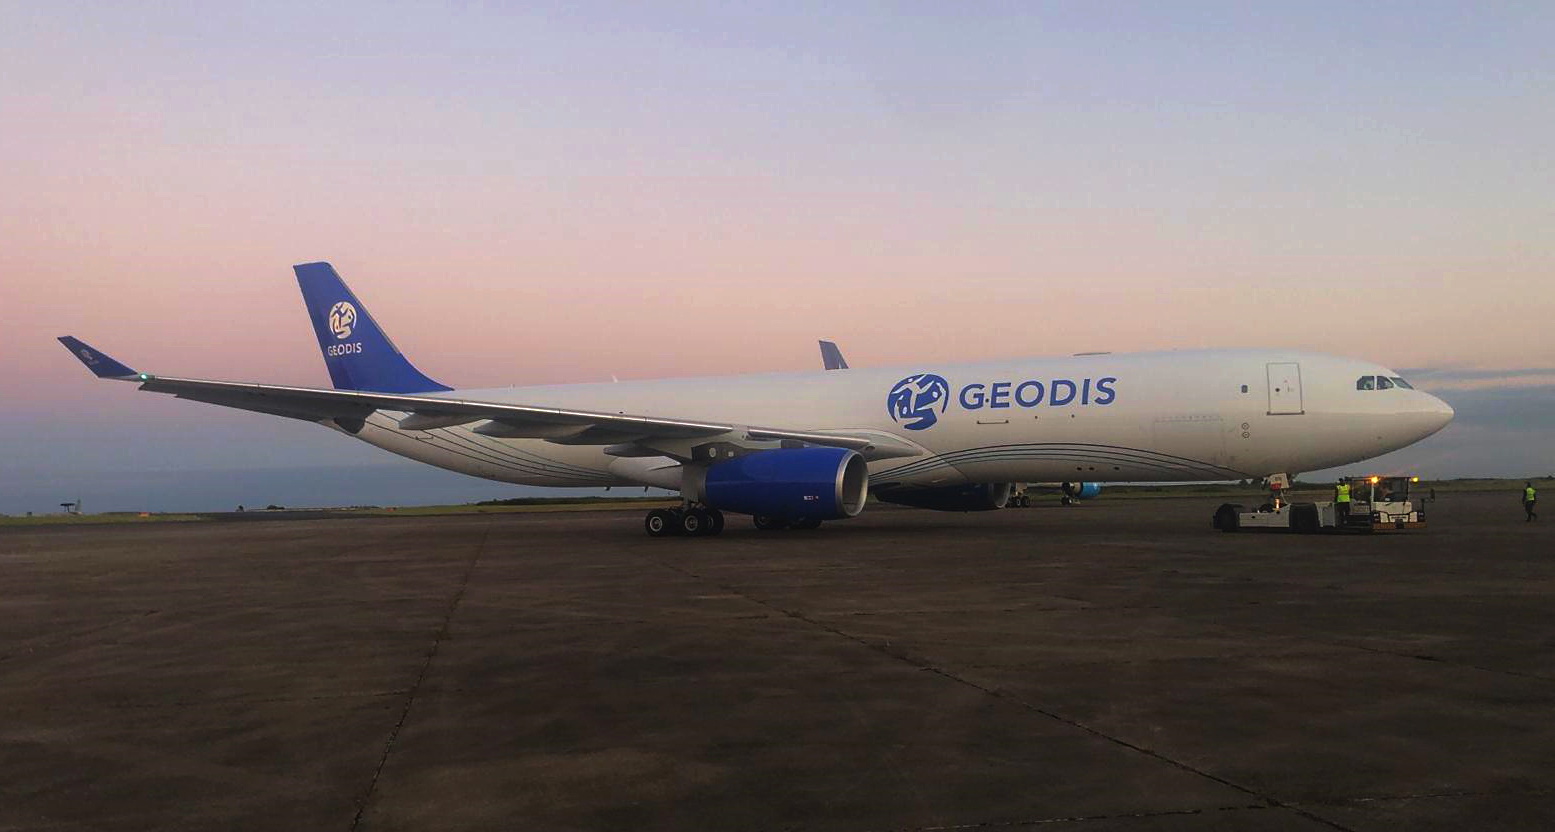 Stratos completes freighter conversion on ex AirAsia X A330 and delivers to Geodis - Stratos